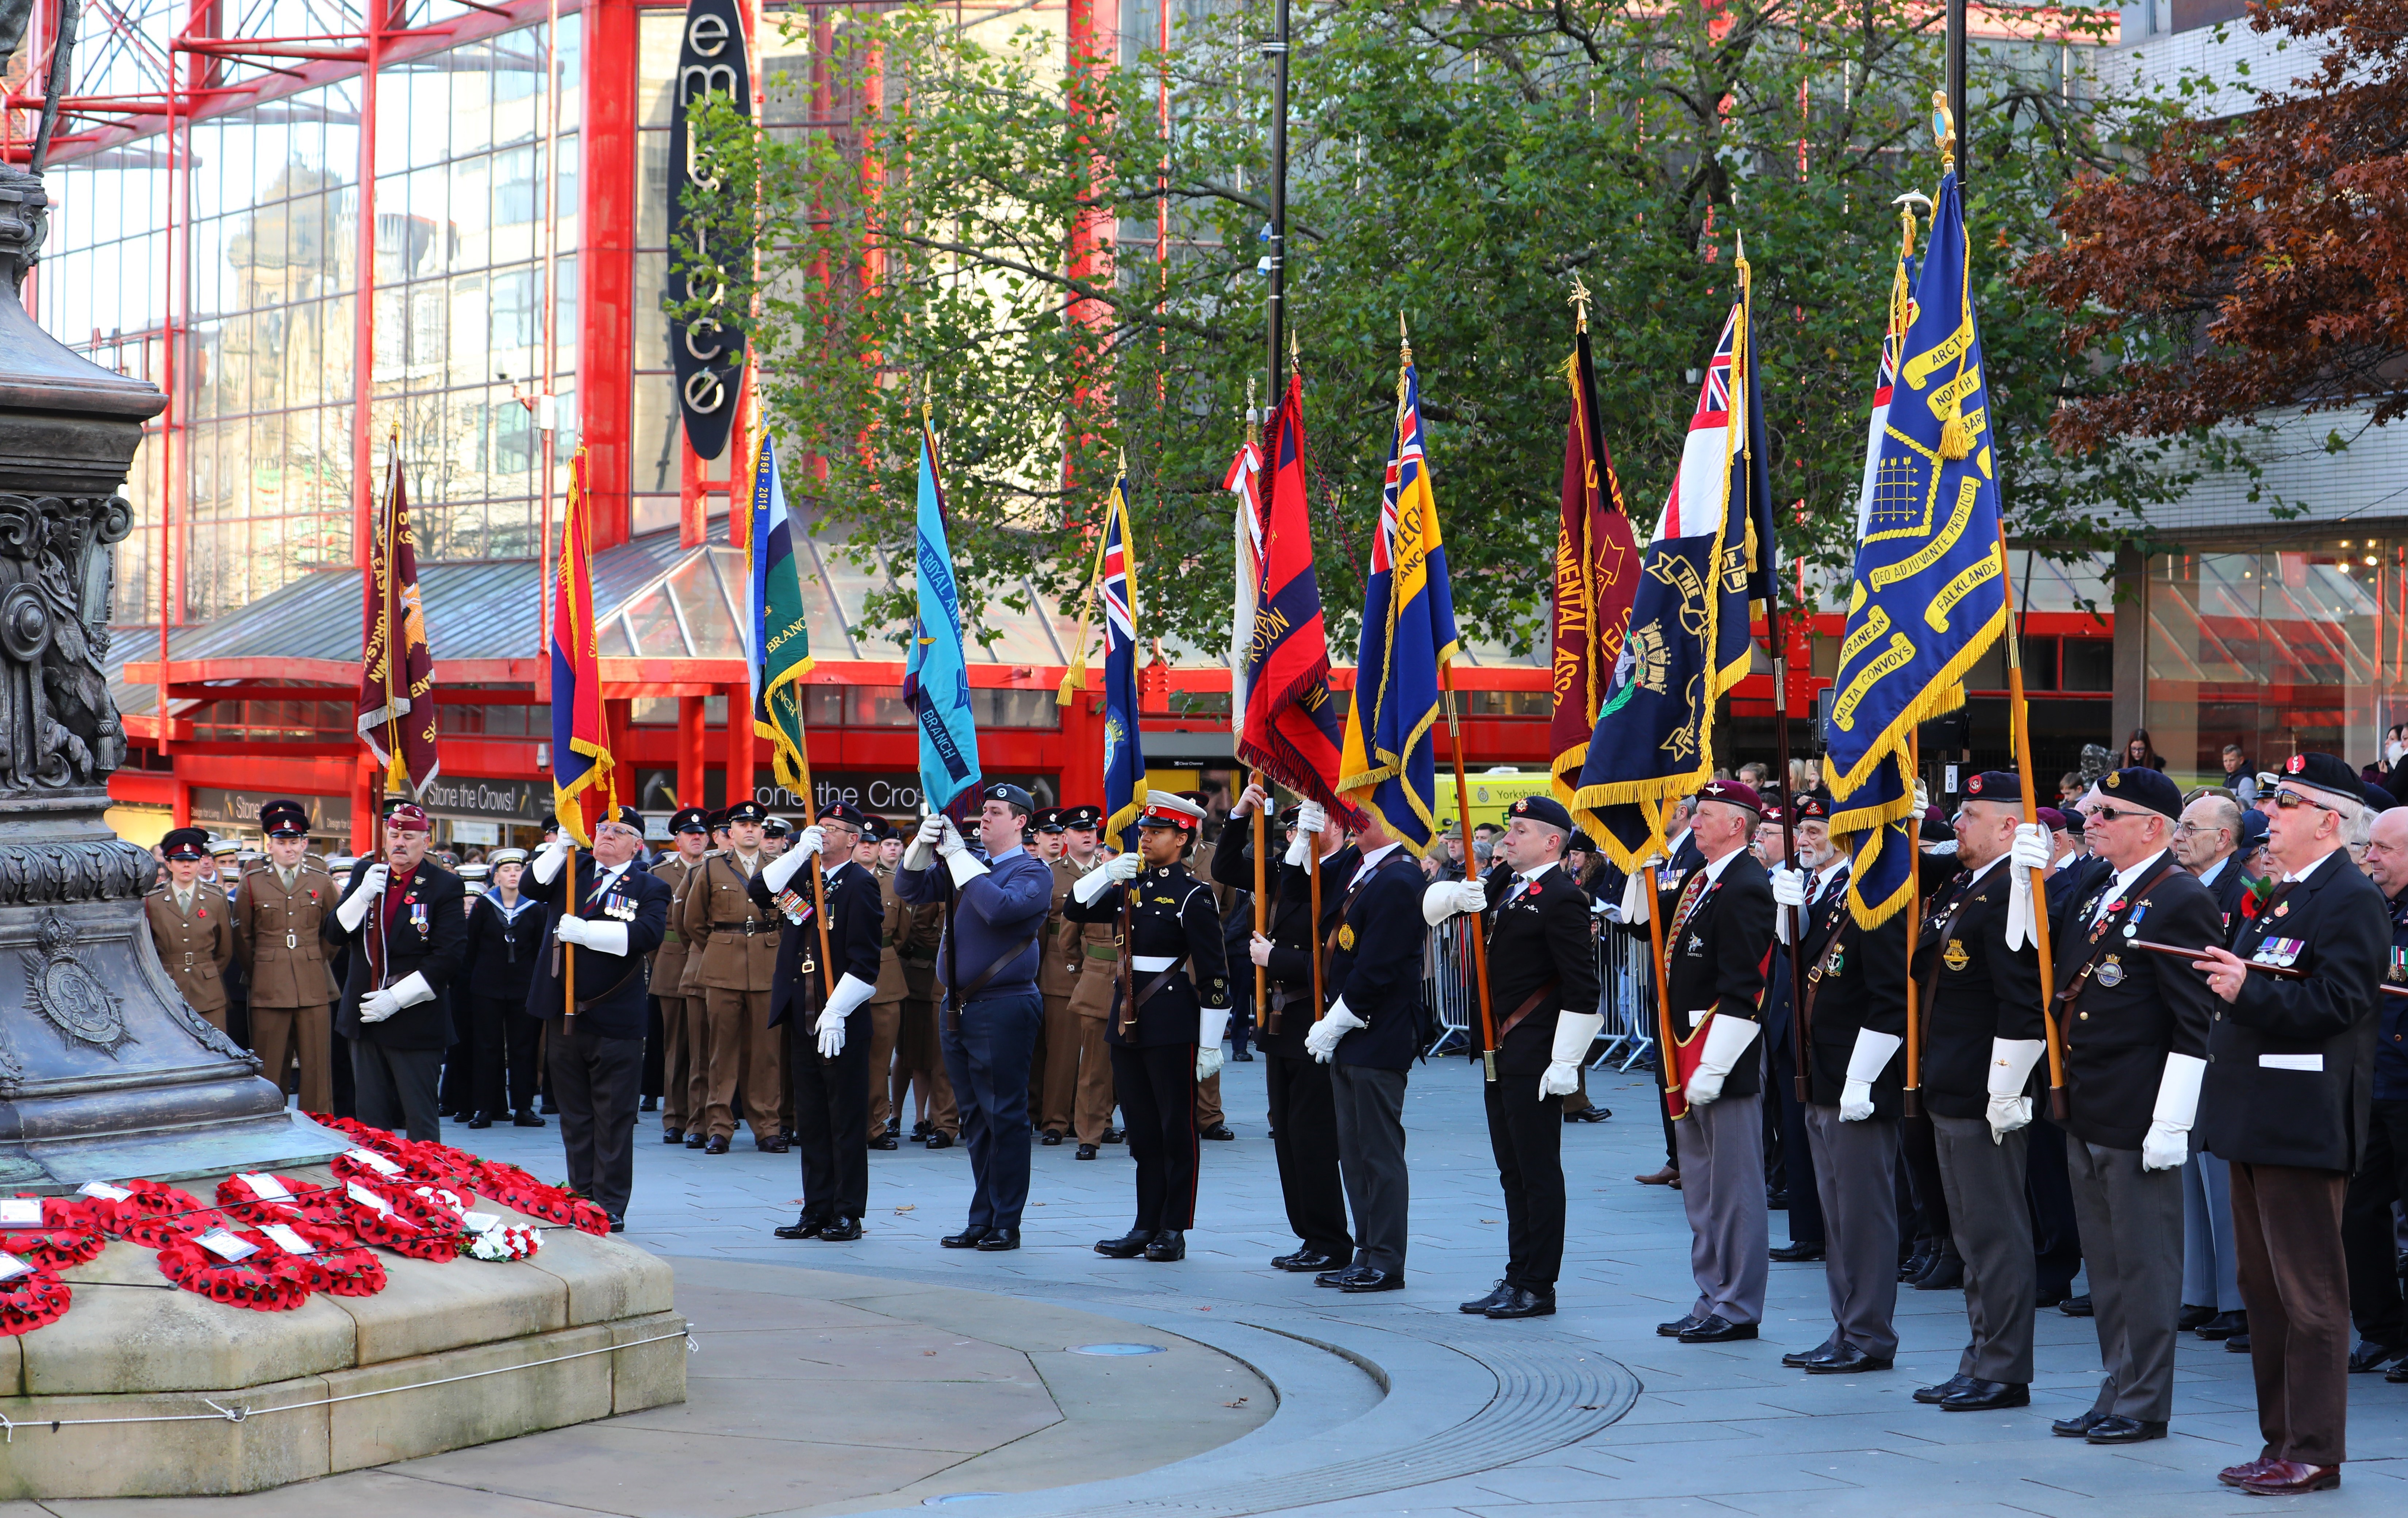 Men dressed in military uniform stand in a line holding flags, poppy wreaths lay in front of a monument